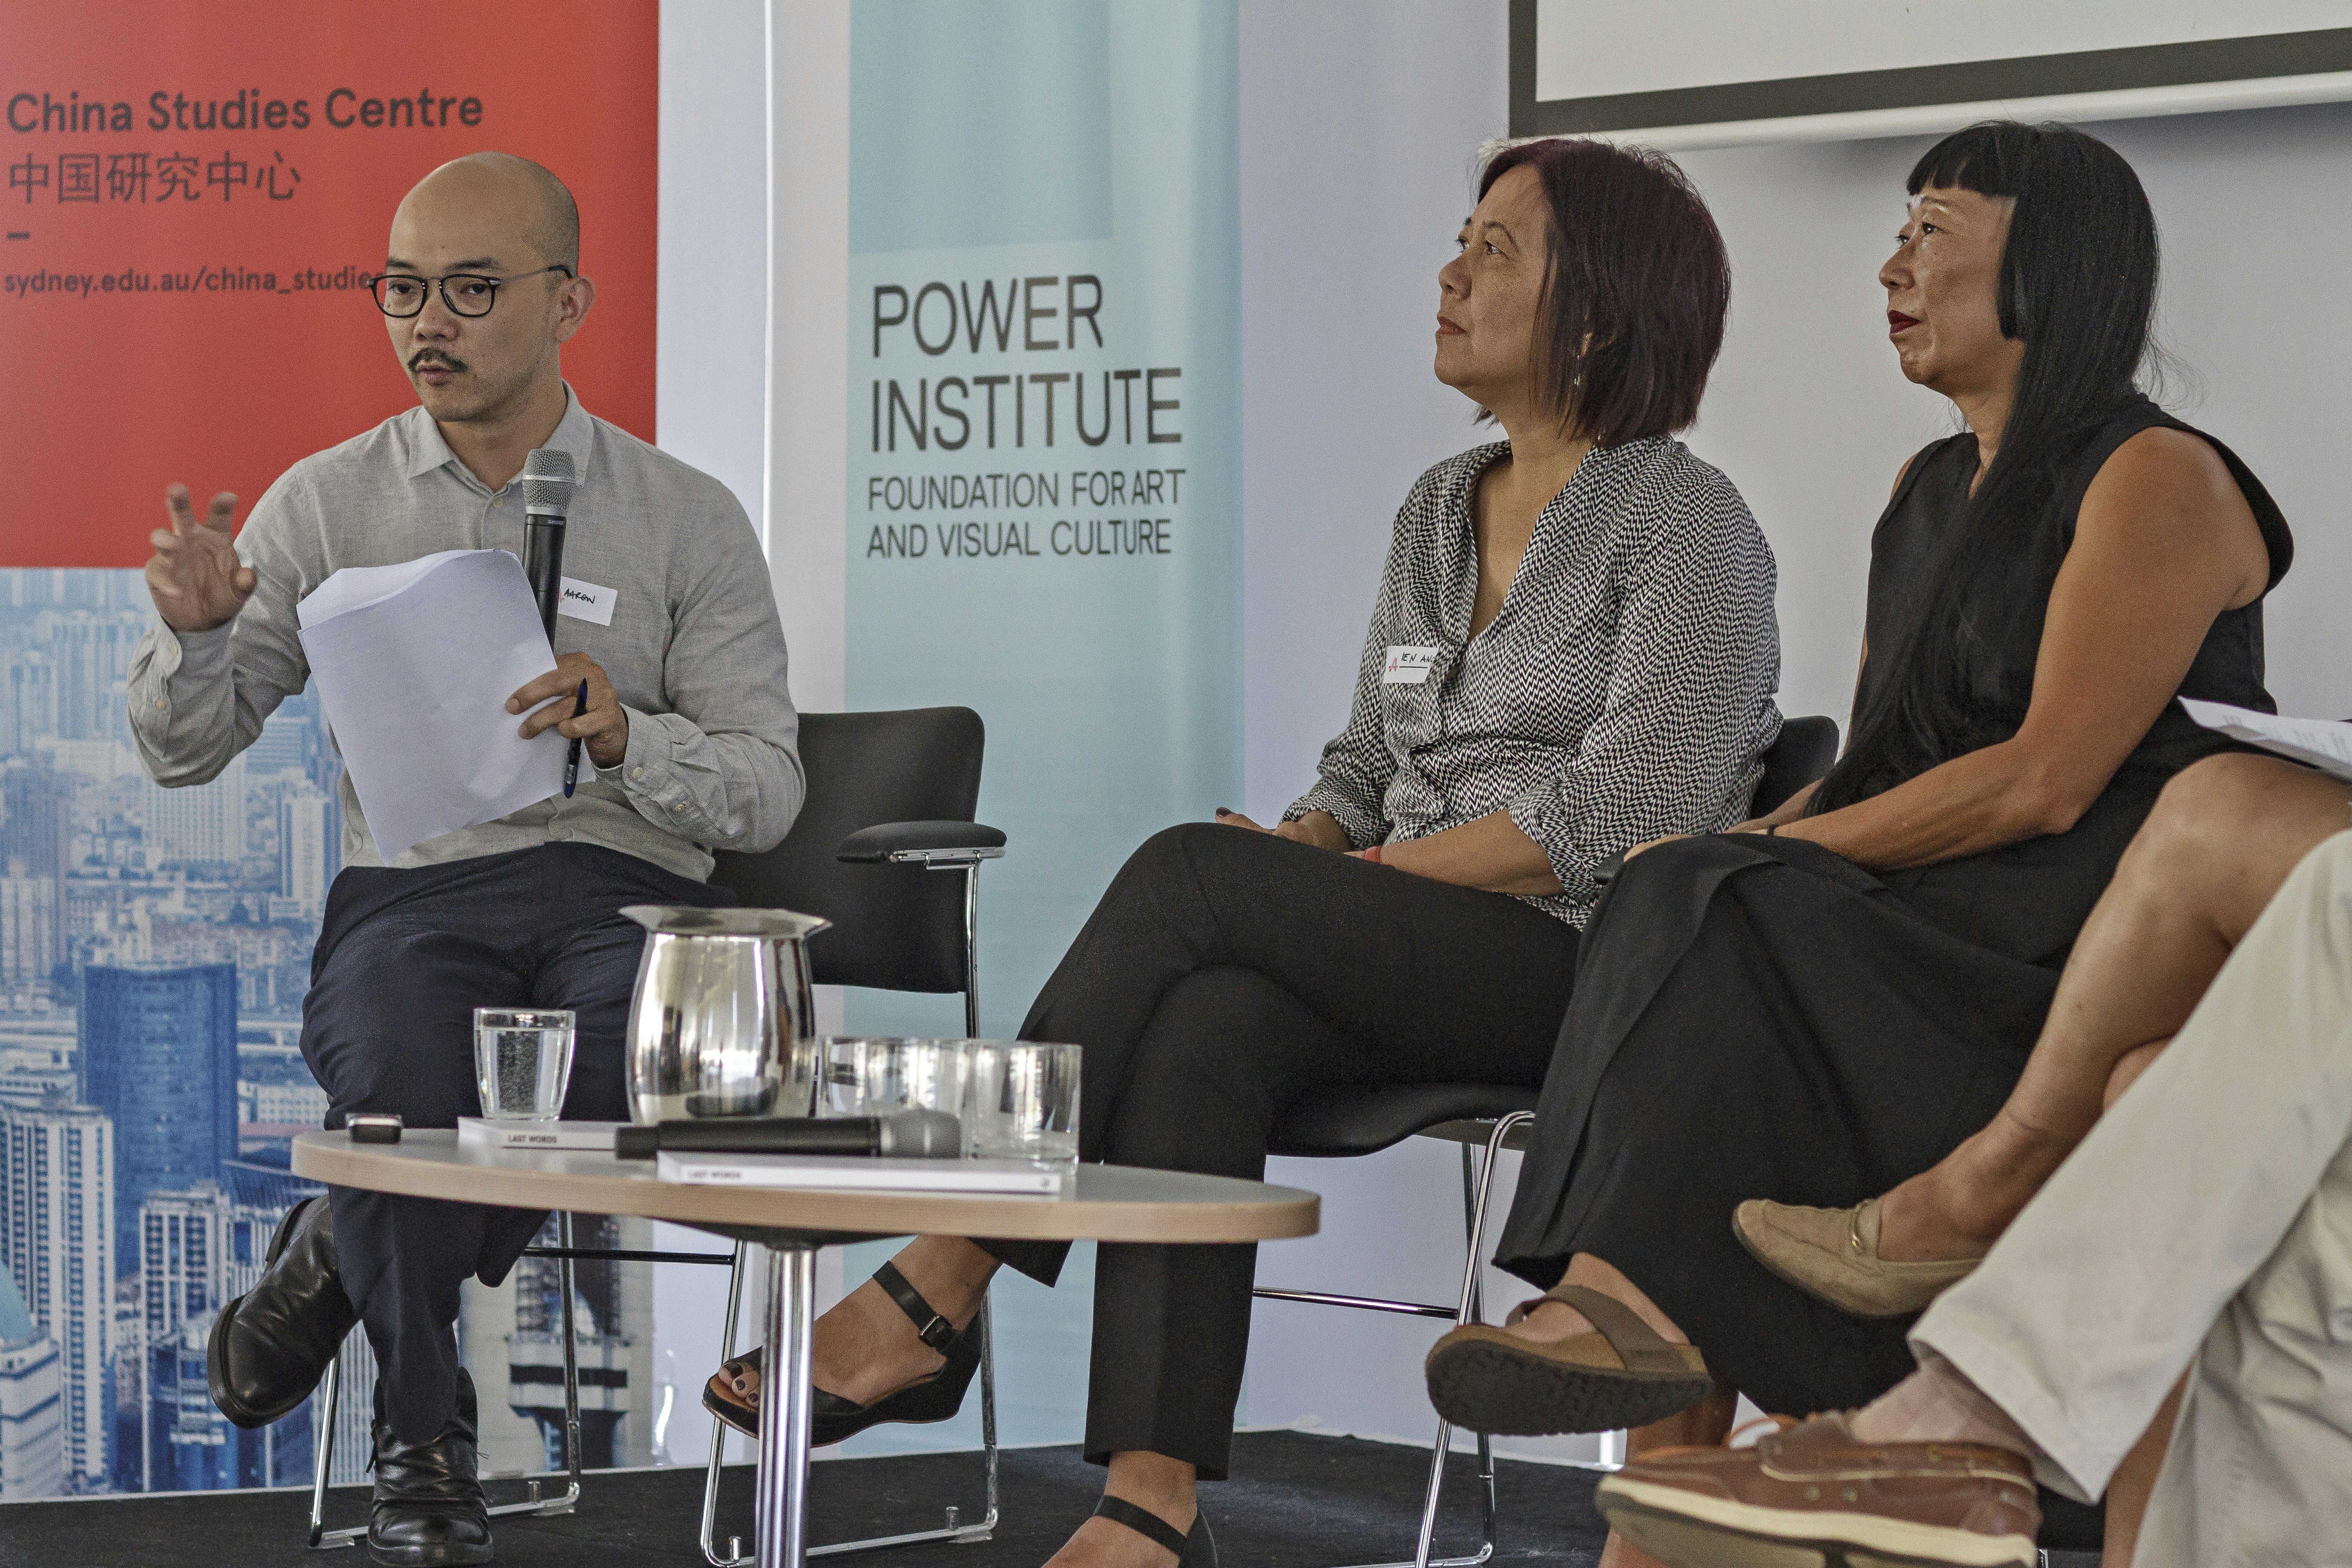 Aaron Seeto, Professor Ien Ang and Dr Lindy Lee. Twenty Years – 4A Symposium, University of Sydney, 4 November 2016. Courtesy The Power Institute, University of Sydney, and 4A Centre for Contemporary Asian Art; photo: Matthew Venables.